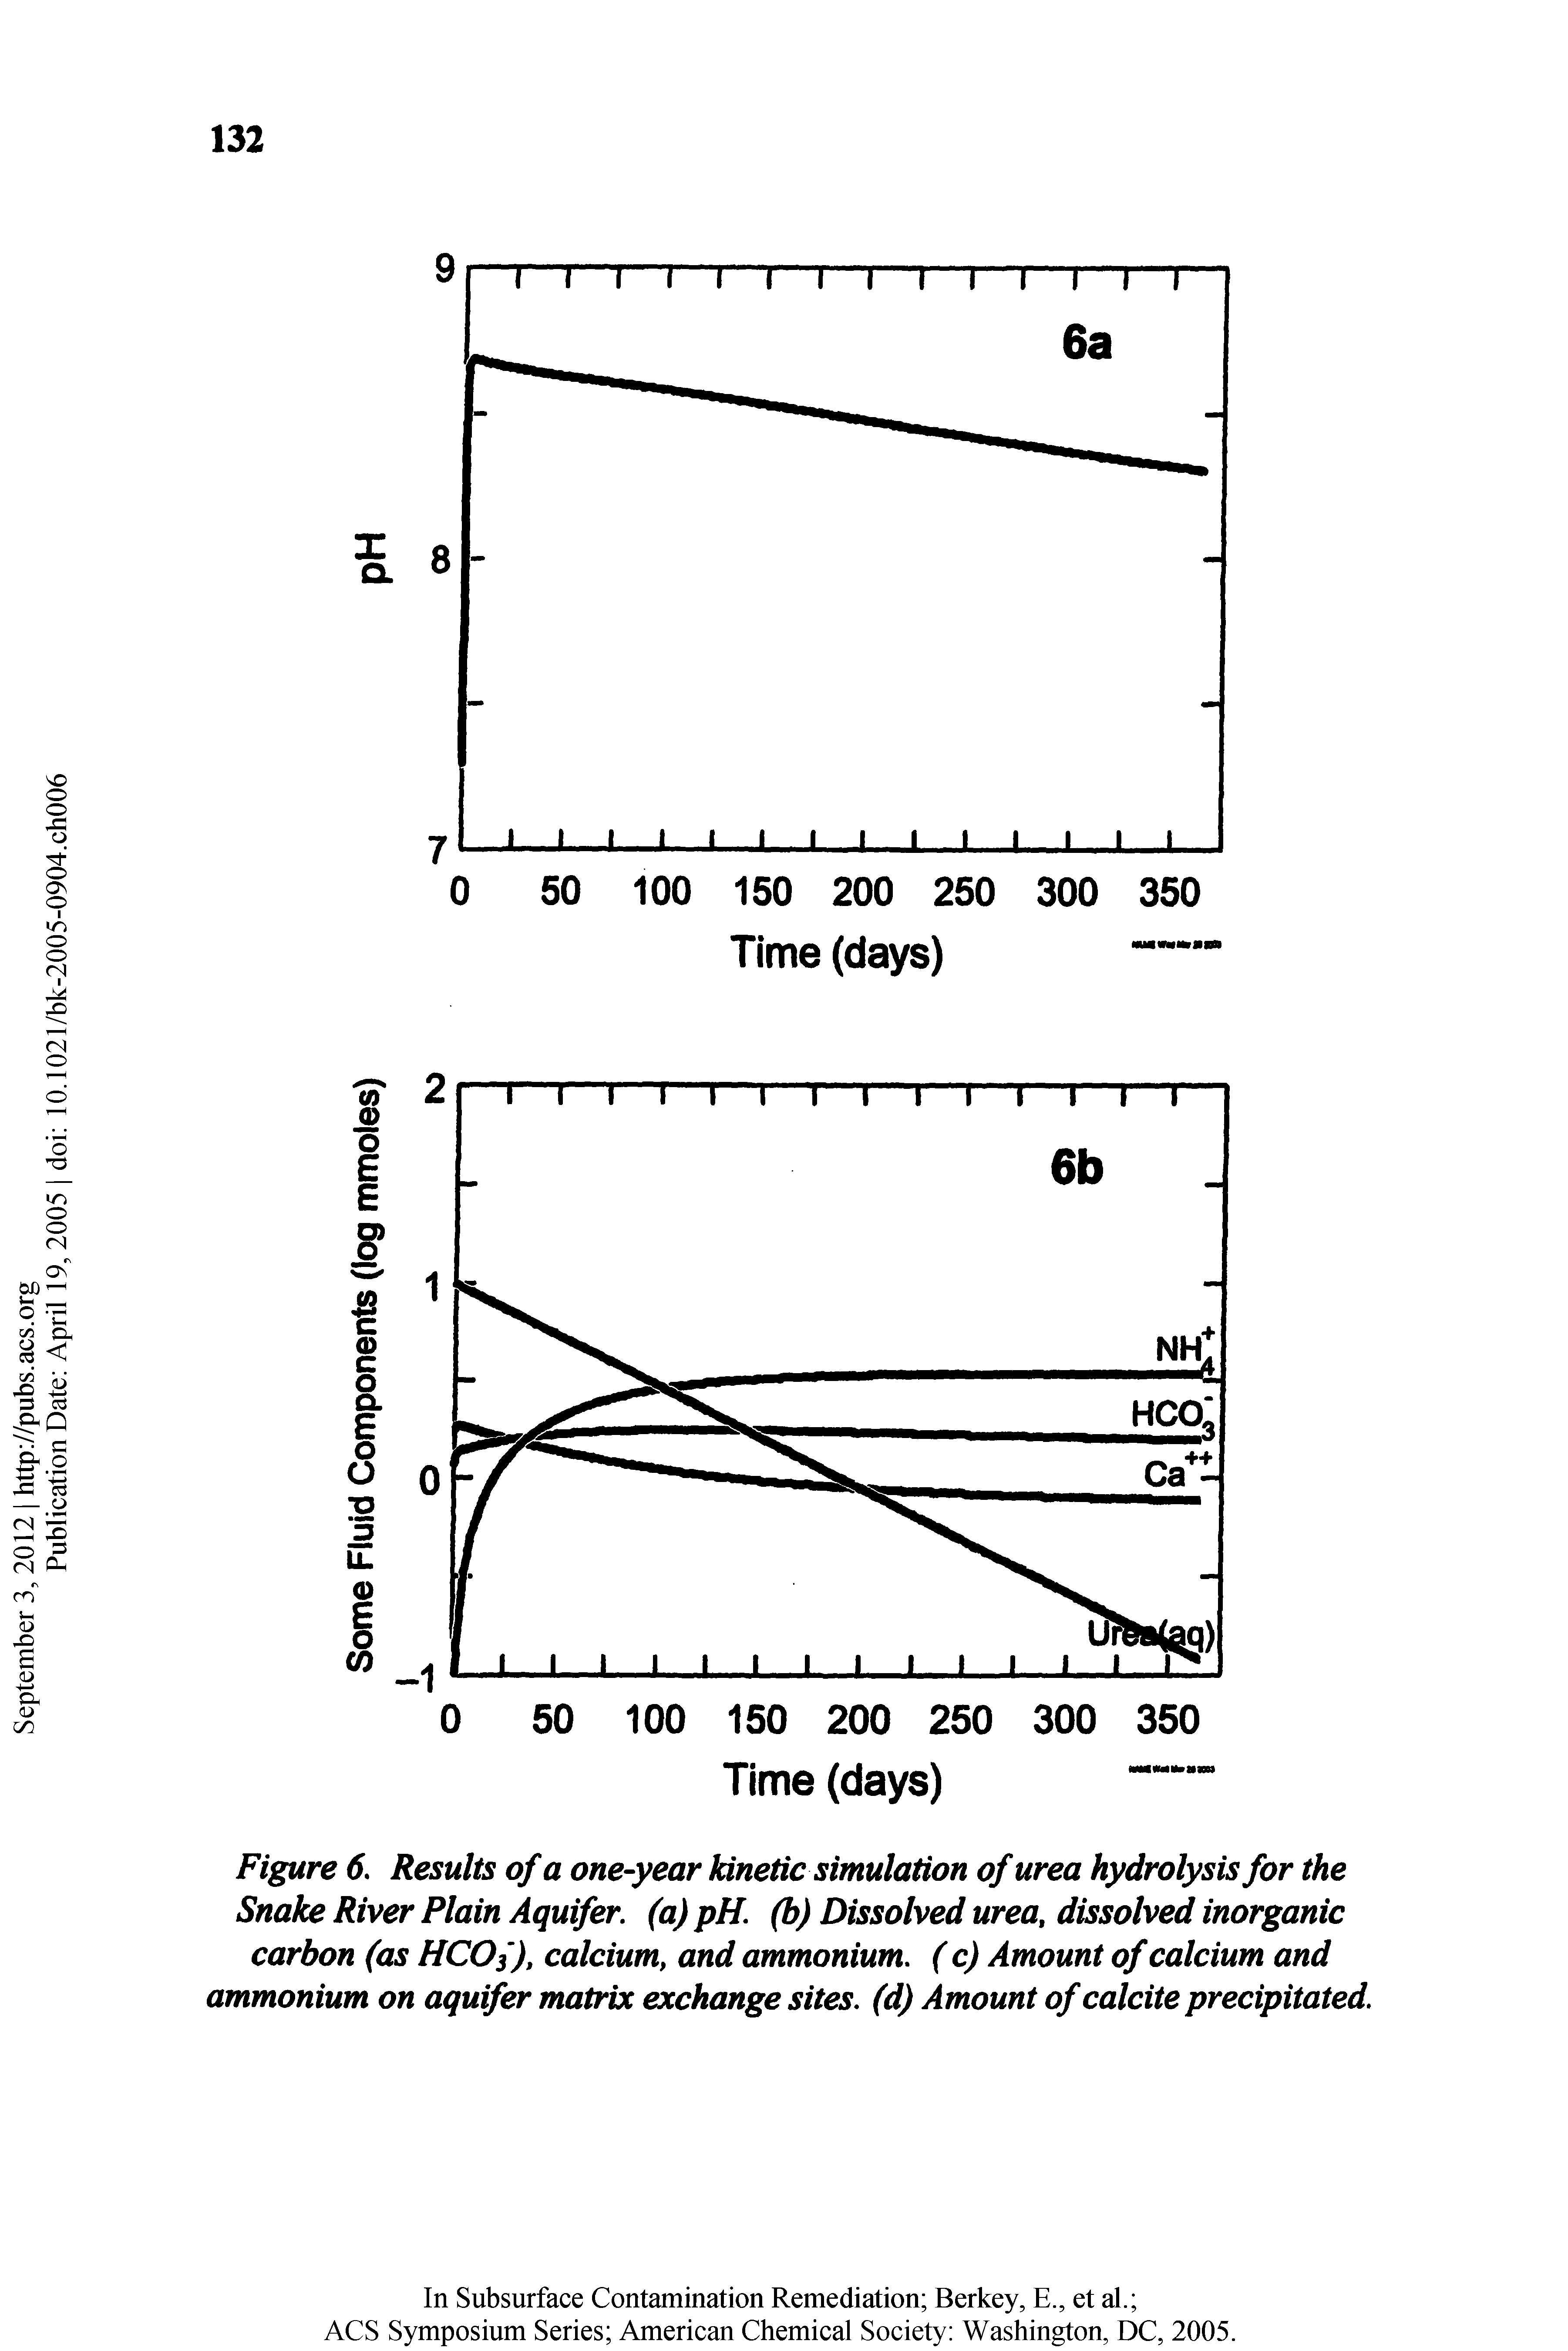 Figure 6, Results of a one-year kinetic simulation of urea hydrolysis for the Snake River Plain Aquifer, (a) pH. (b) Dissolved urea, dissolved inorganic carbon (as HC0 ), calcium, and ammonium. (c) Amount of calcium and ammonium on aquifer matrix exchange sites, (d) Amount of calcite precipitated.